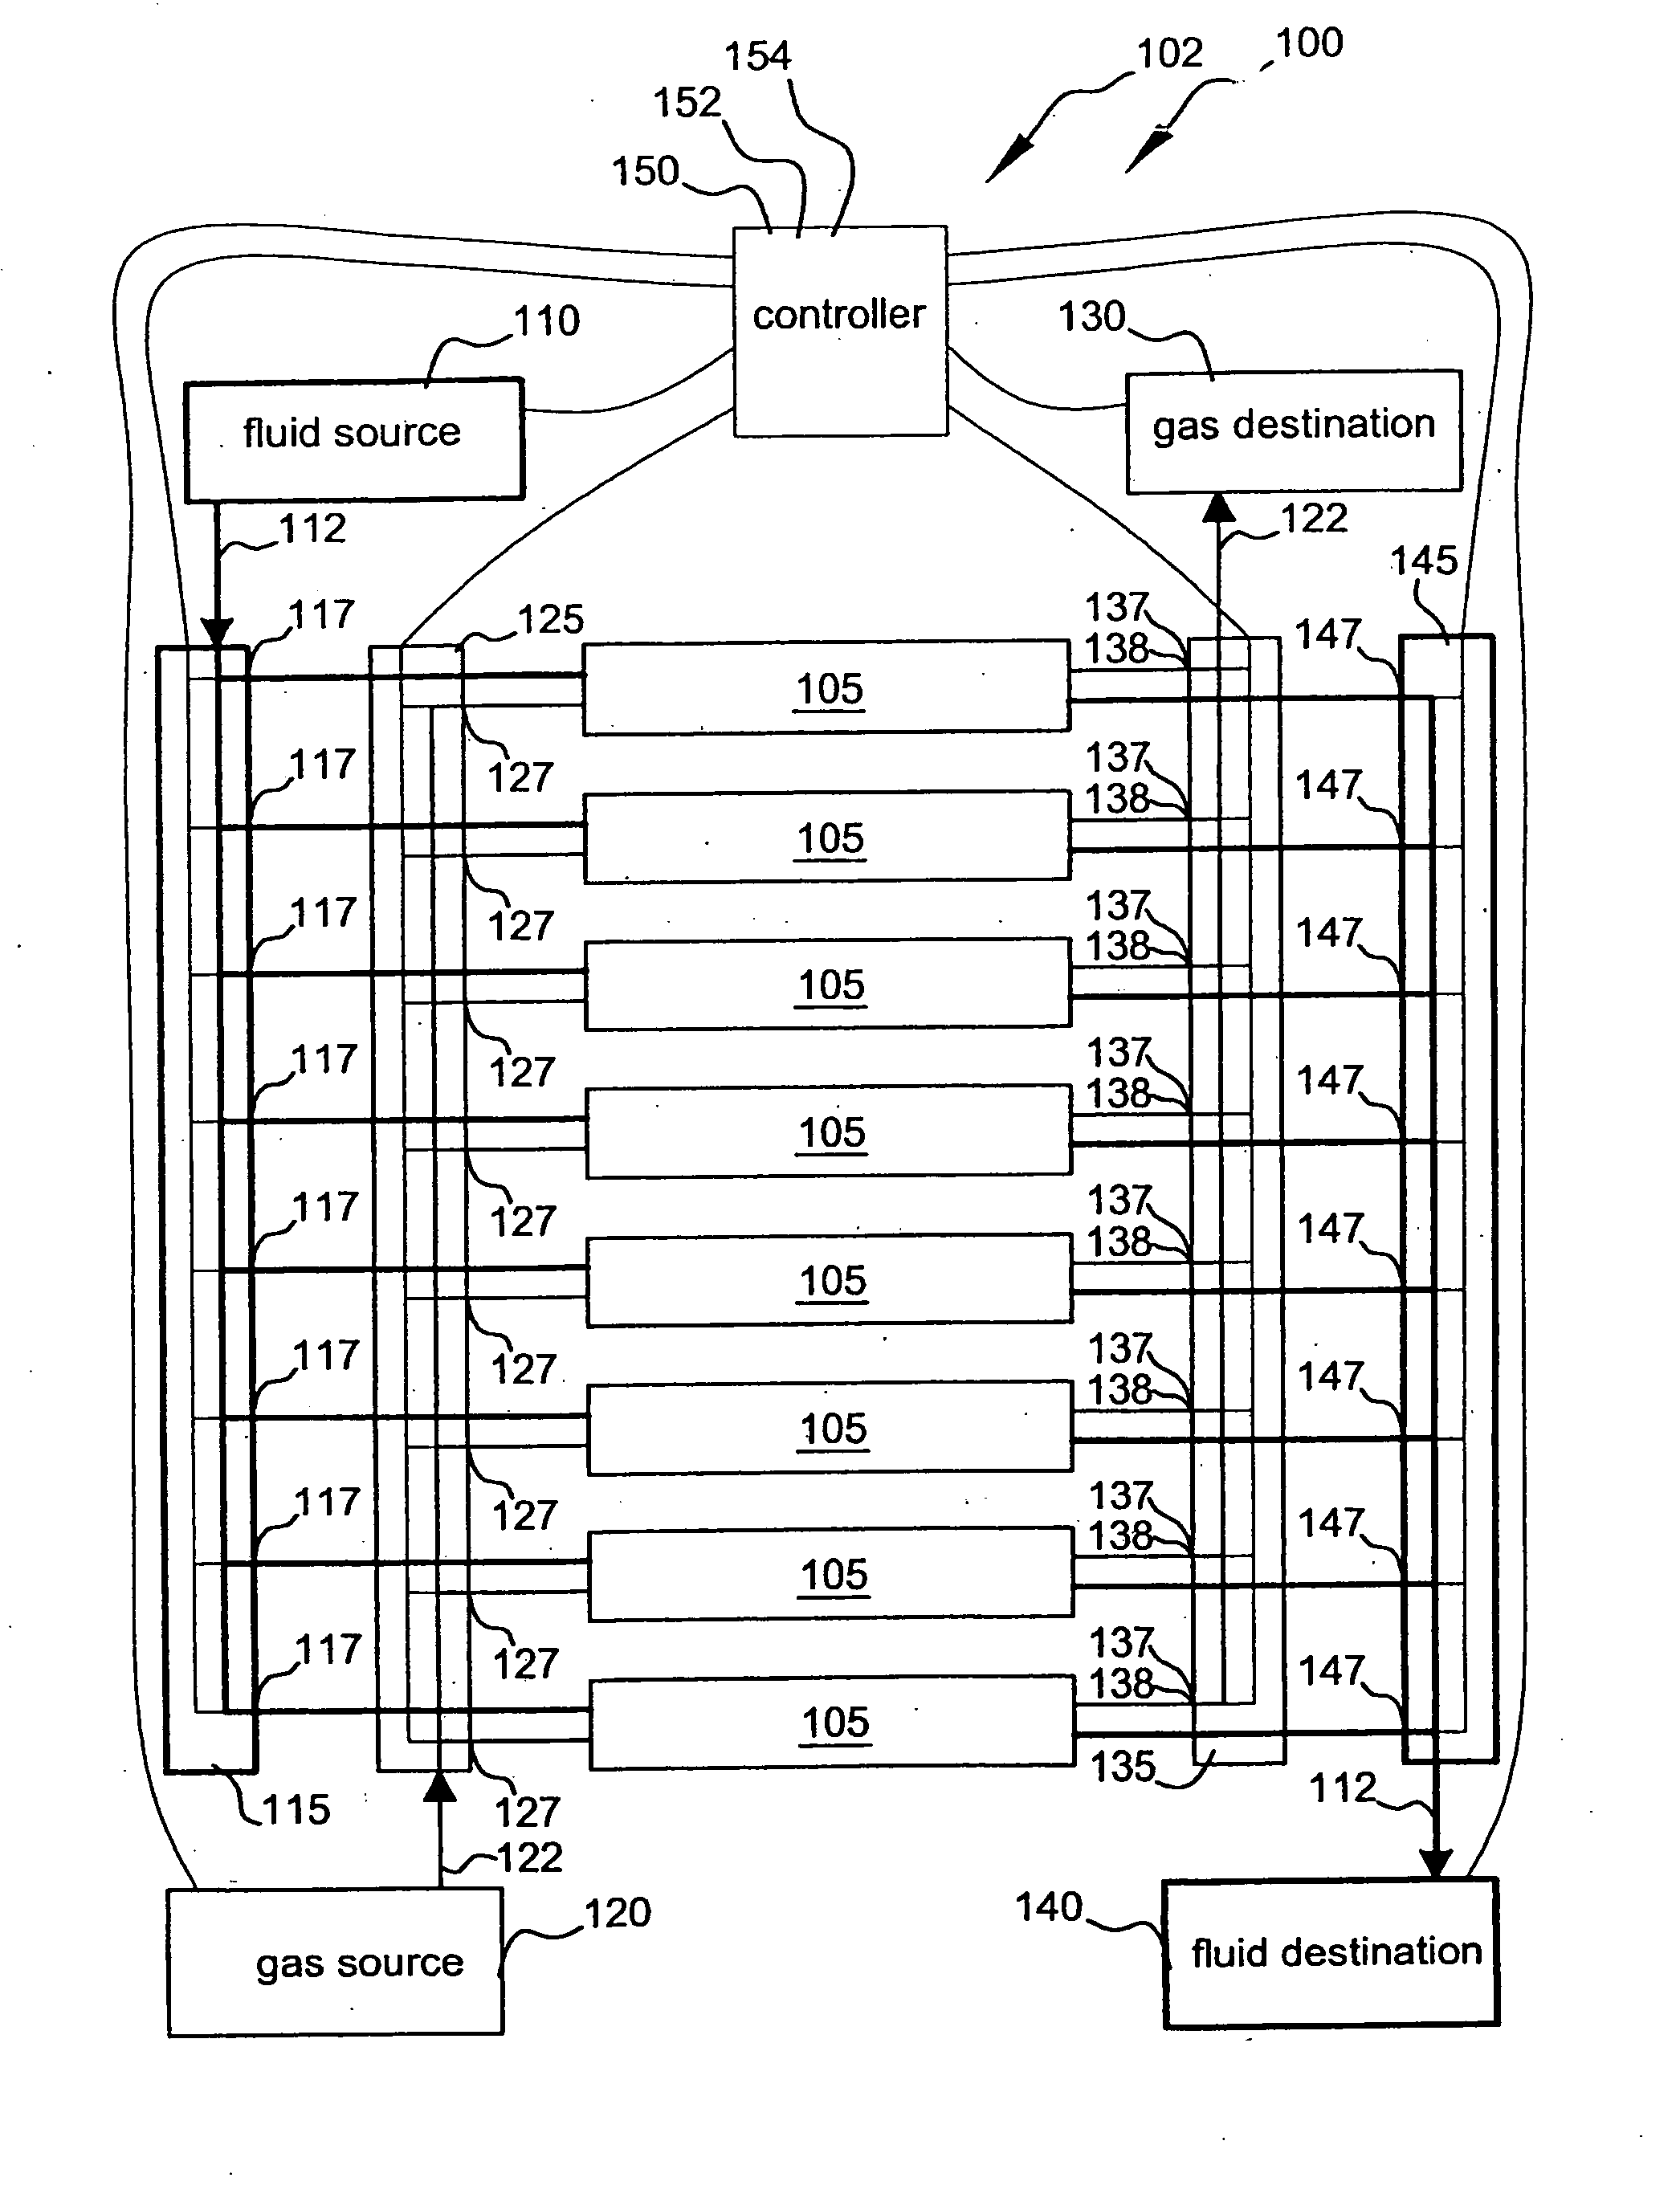 Method and system for bioreaction